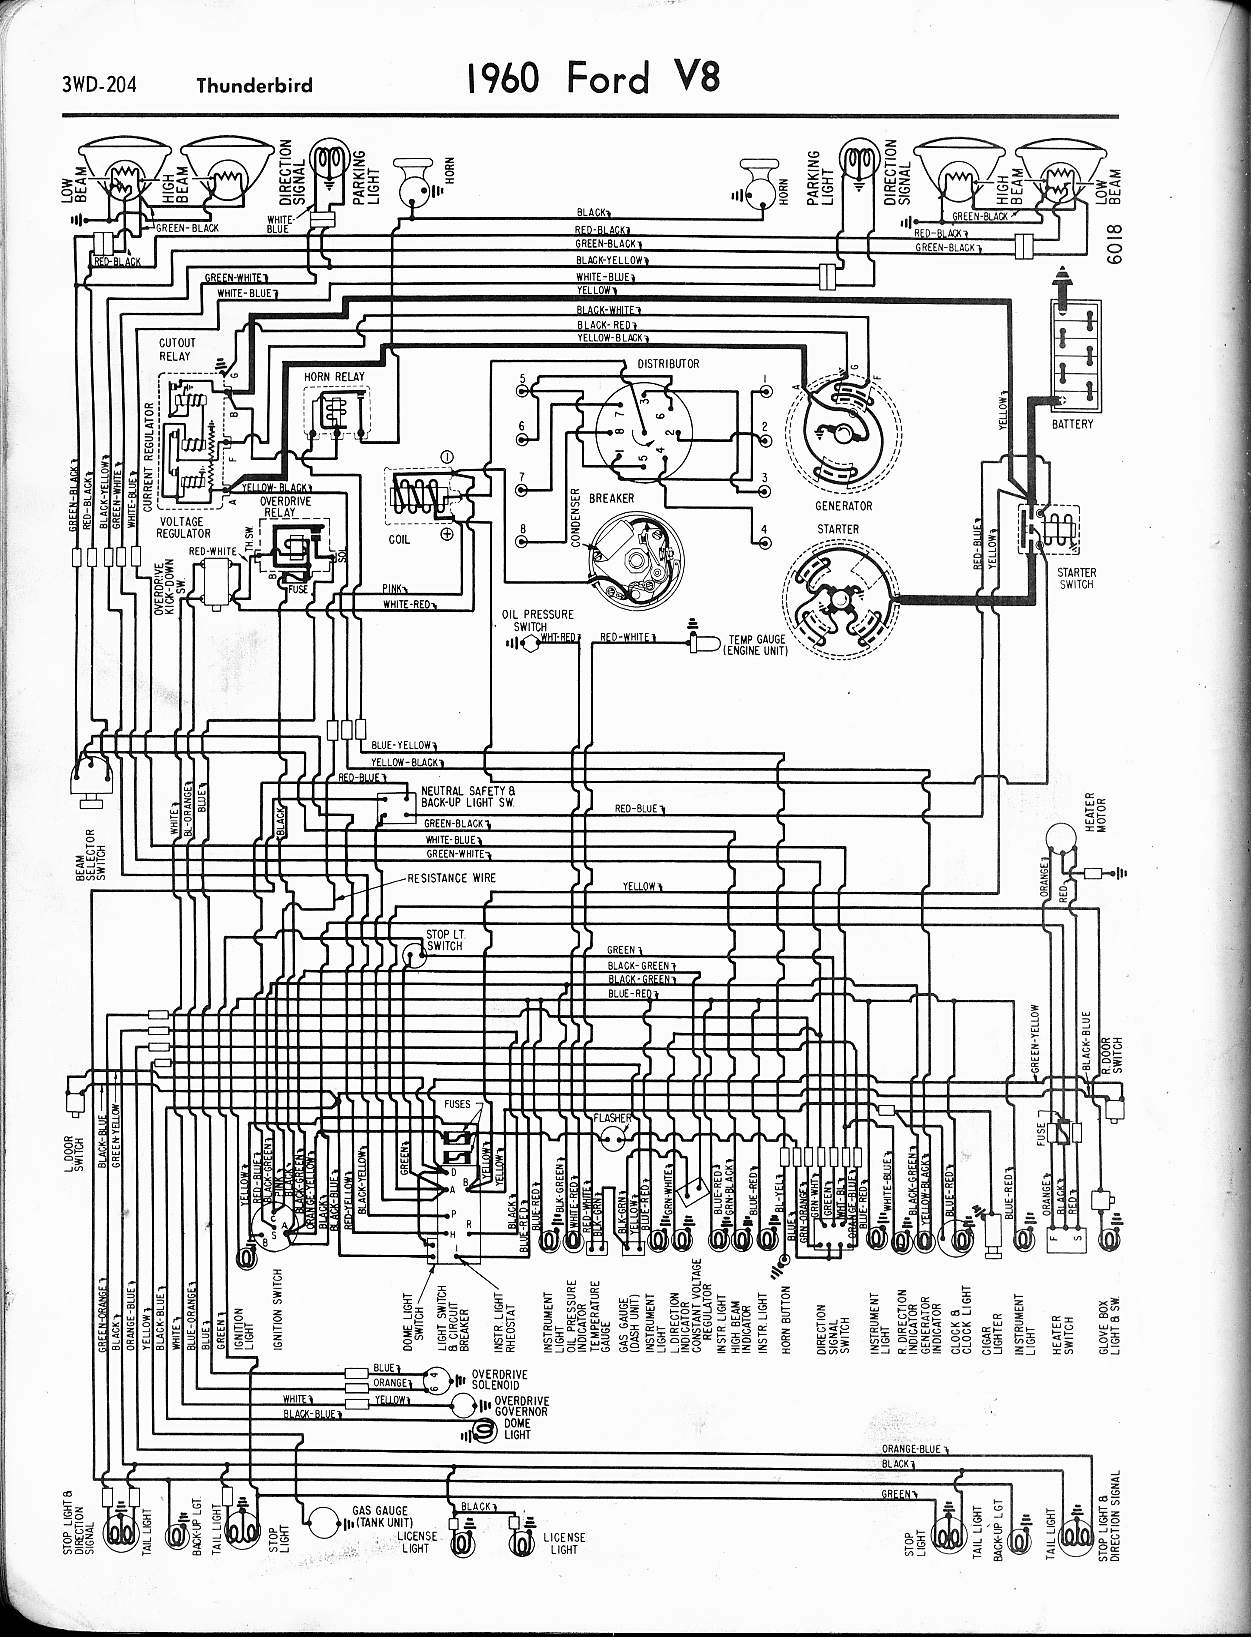 1955 Thunderbird Wiring Diagram from www.oocities.org